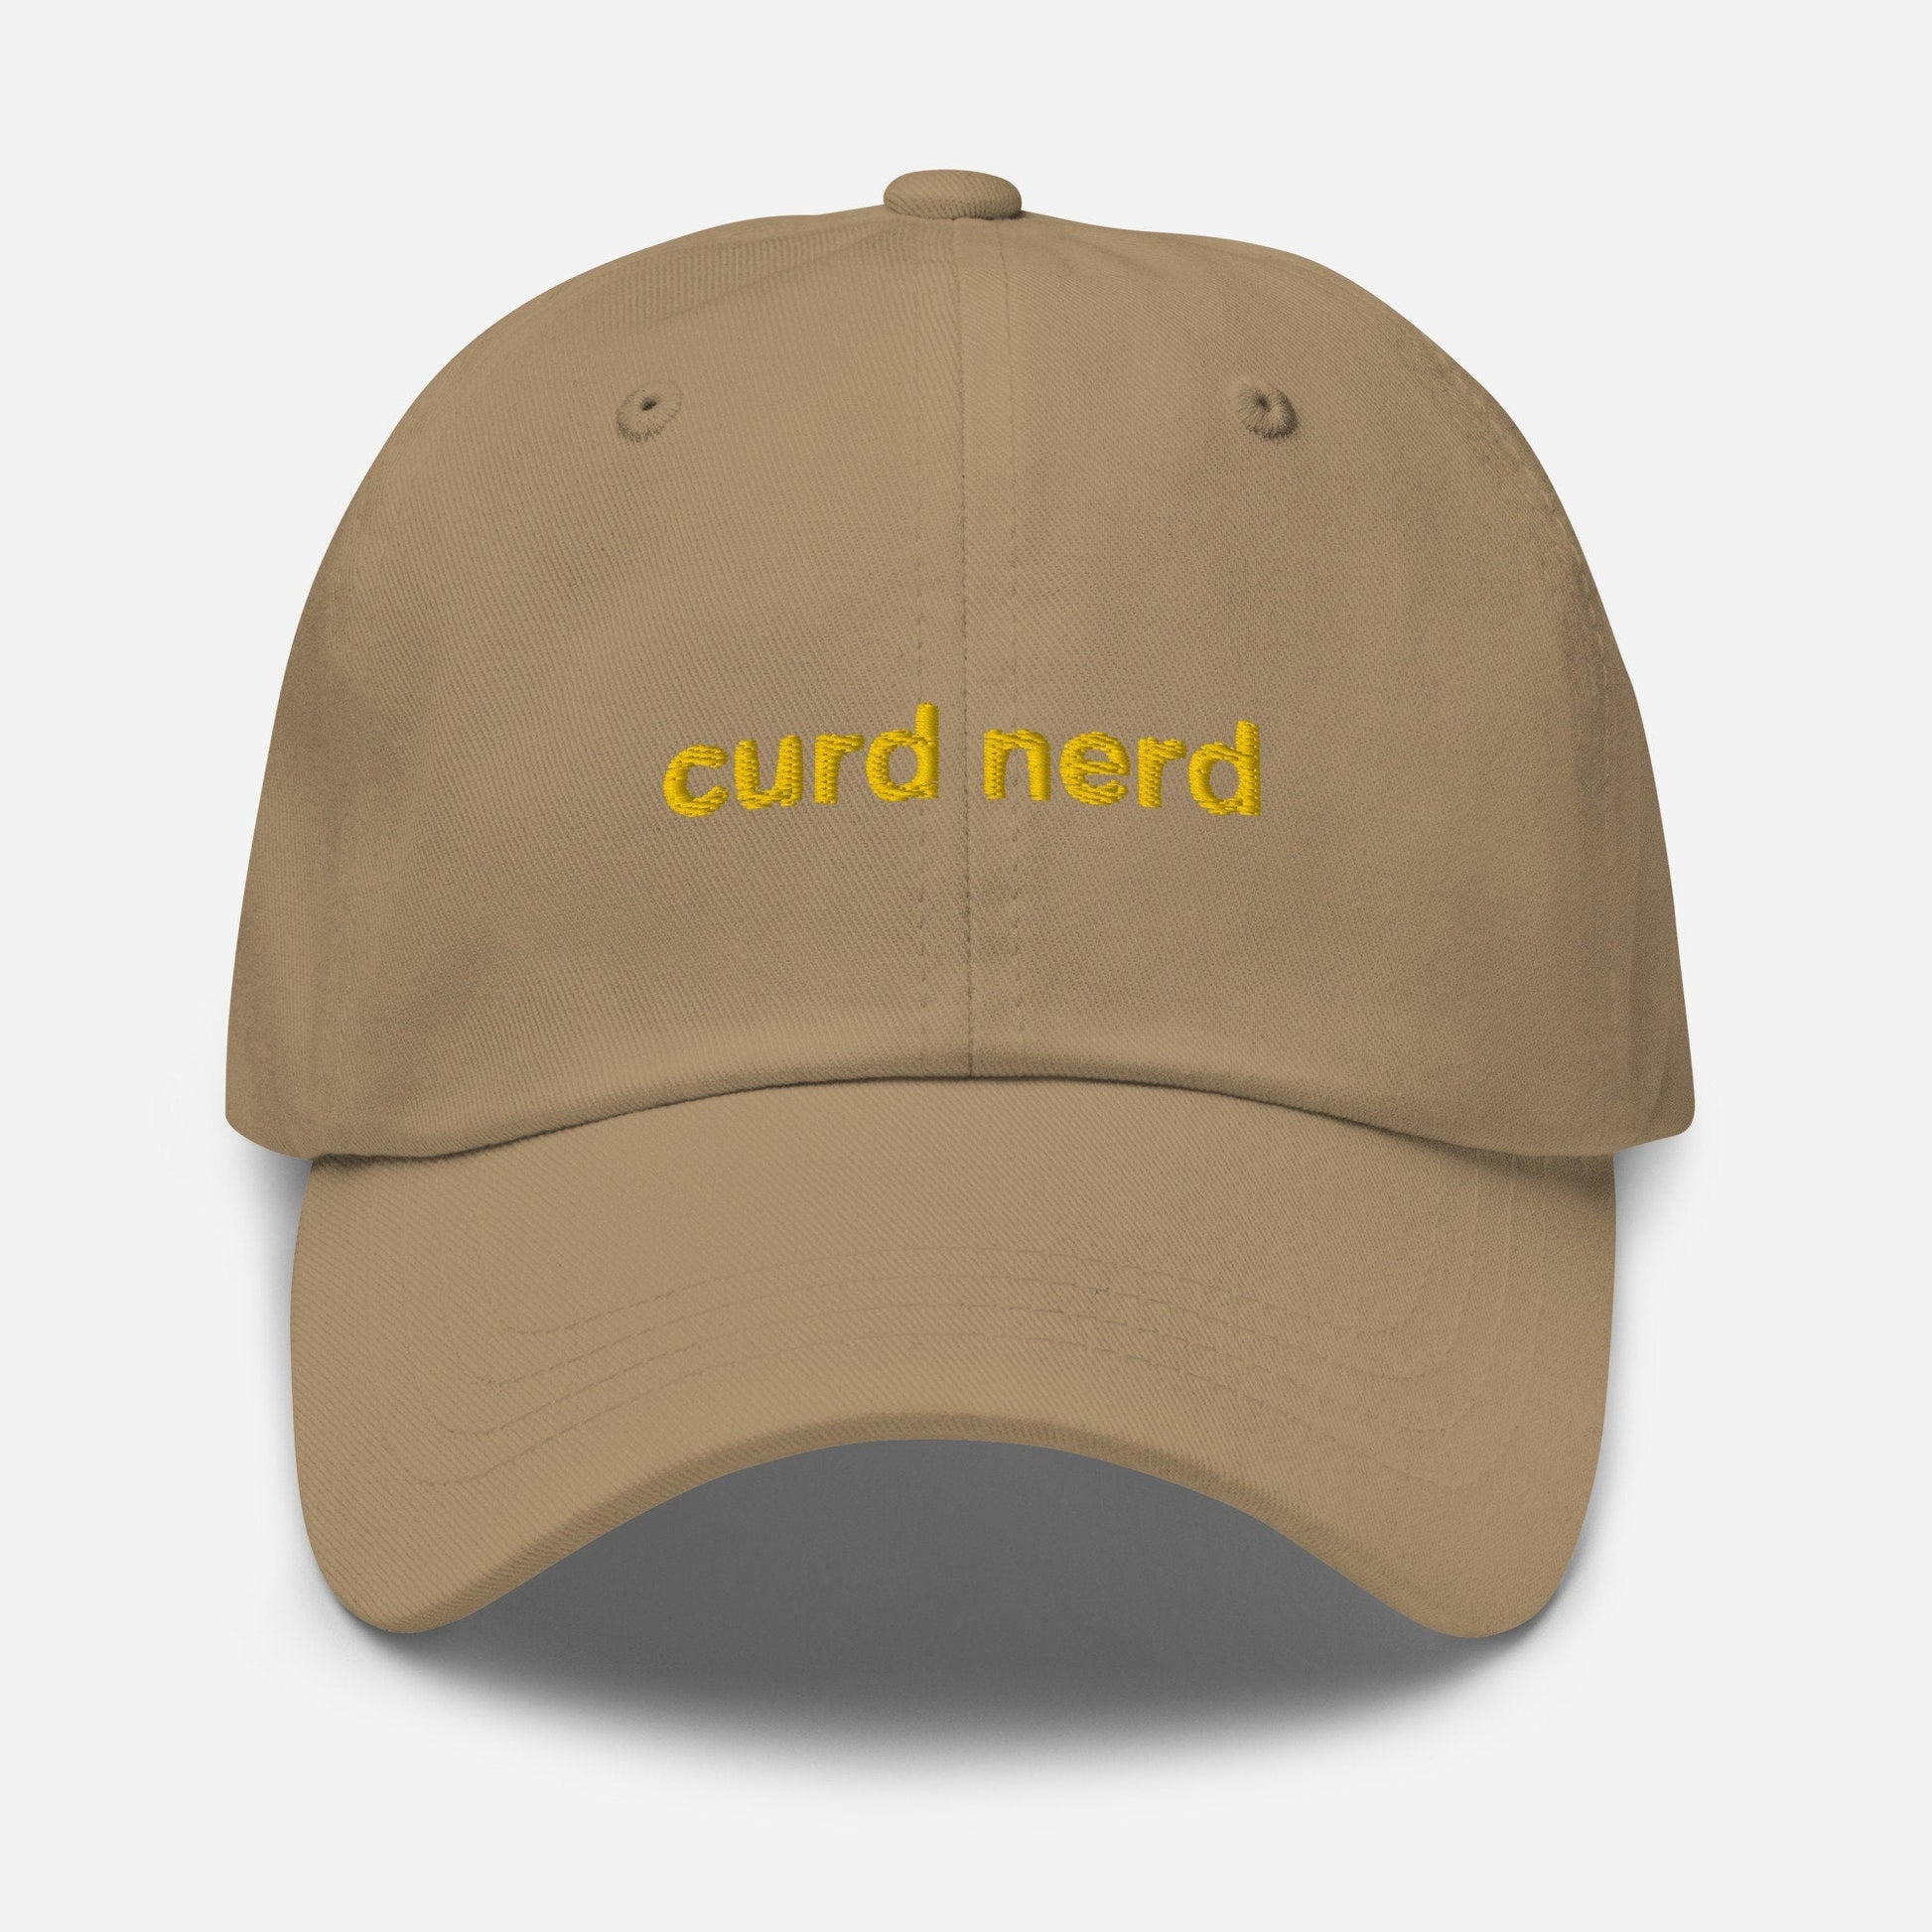 Curd Nerd Dad Hat - Gift for Cheese lovers, Home Cooks & Chefs - Embroidered Cotton Cap - Evilwater Originals